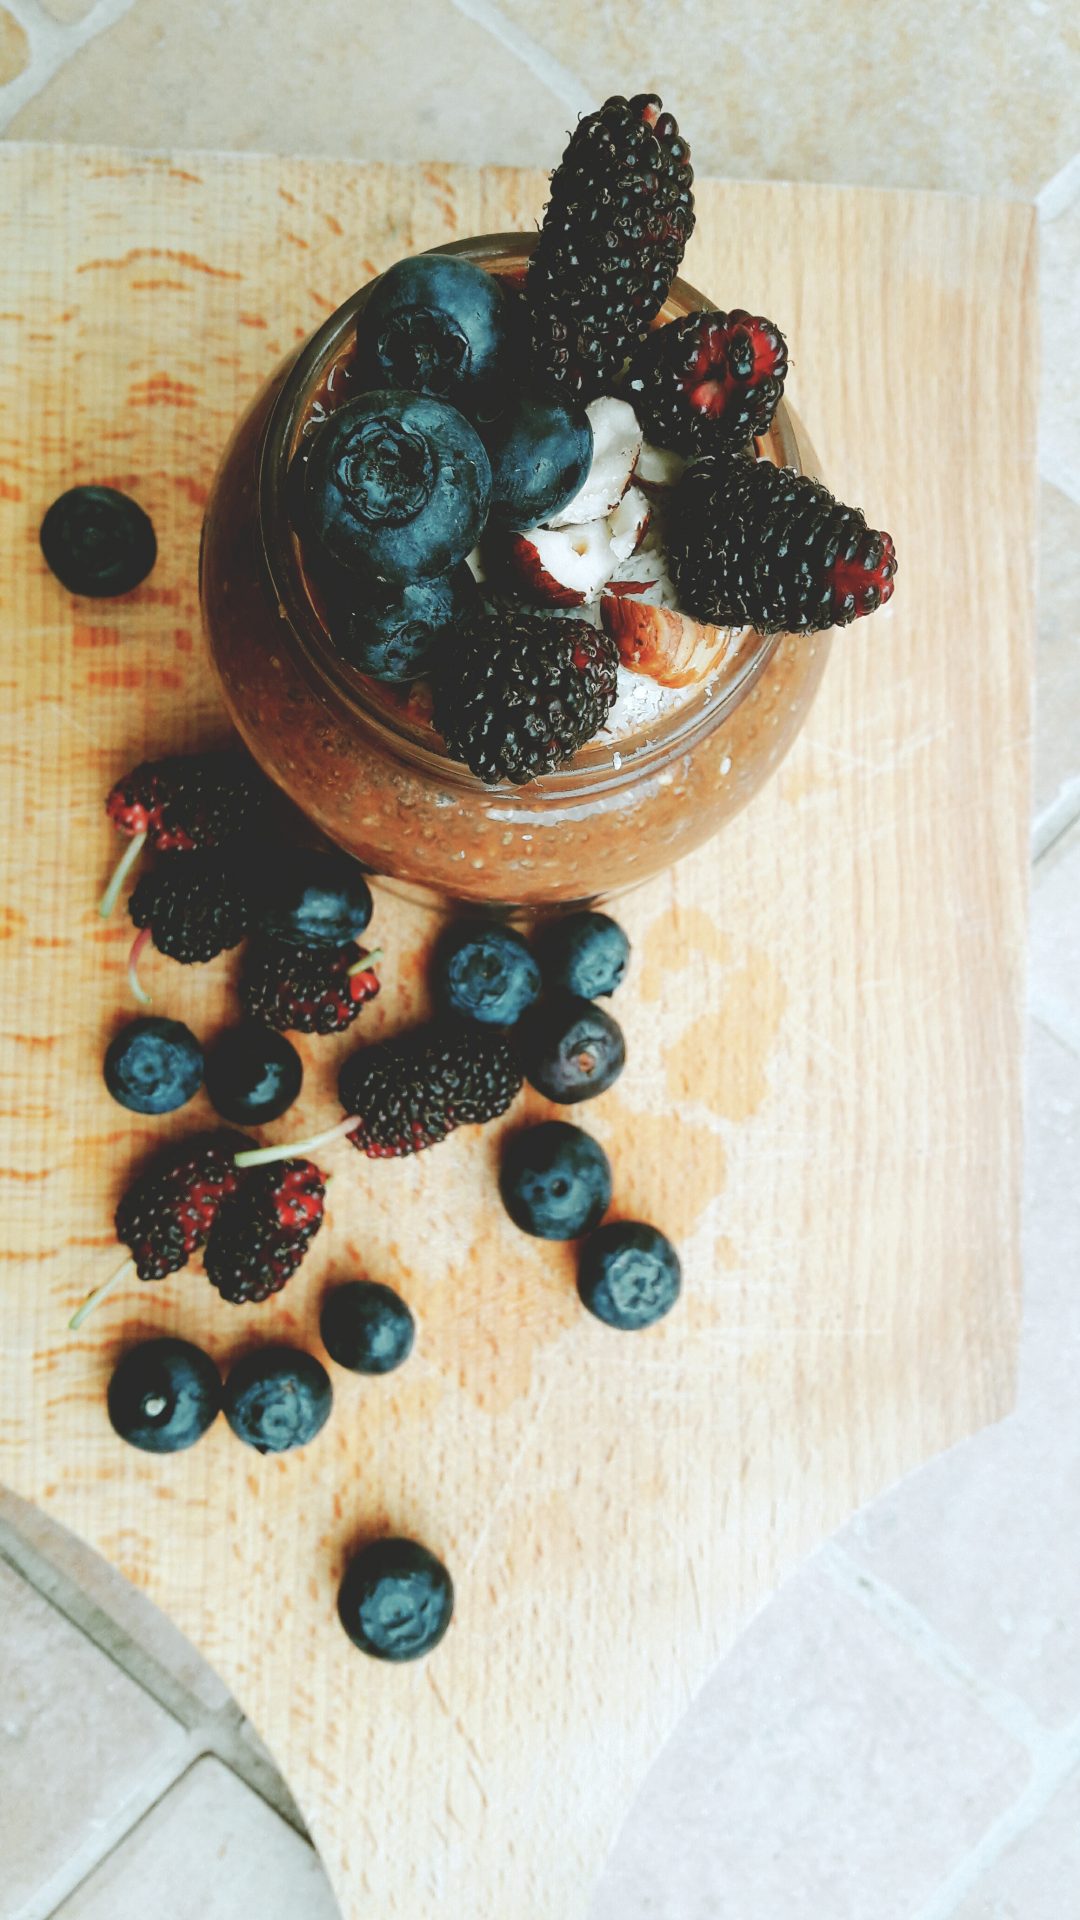 Mulberry chia pudding